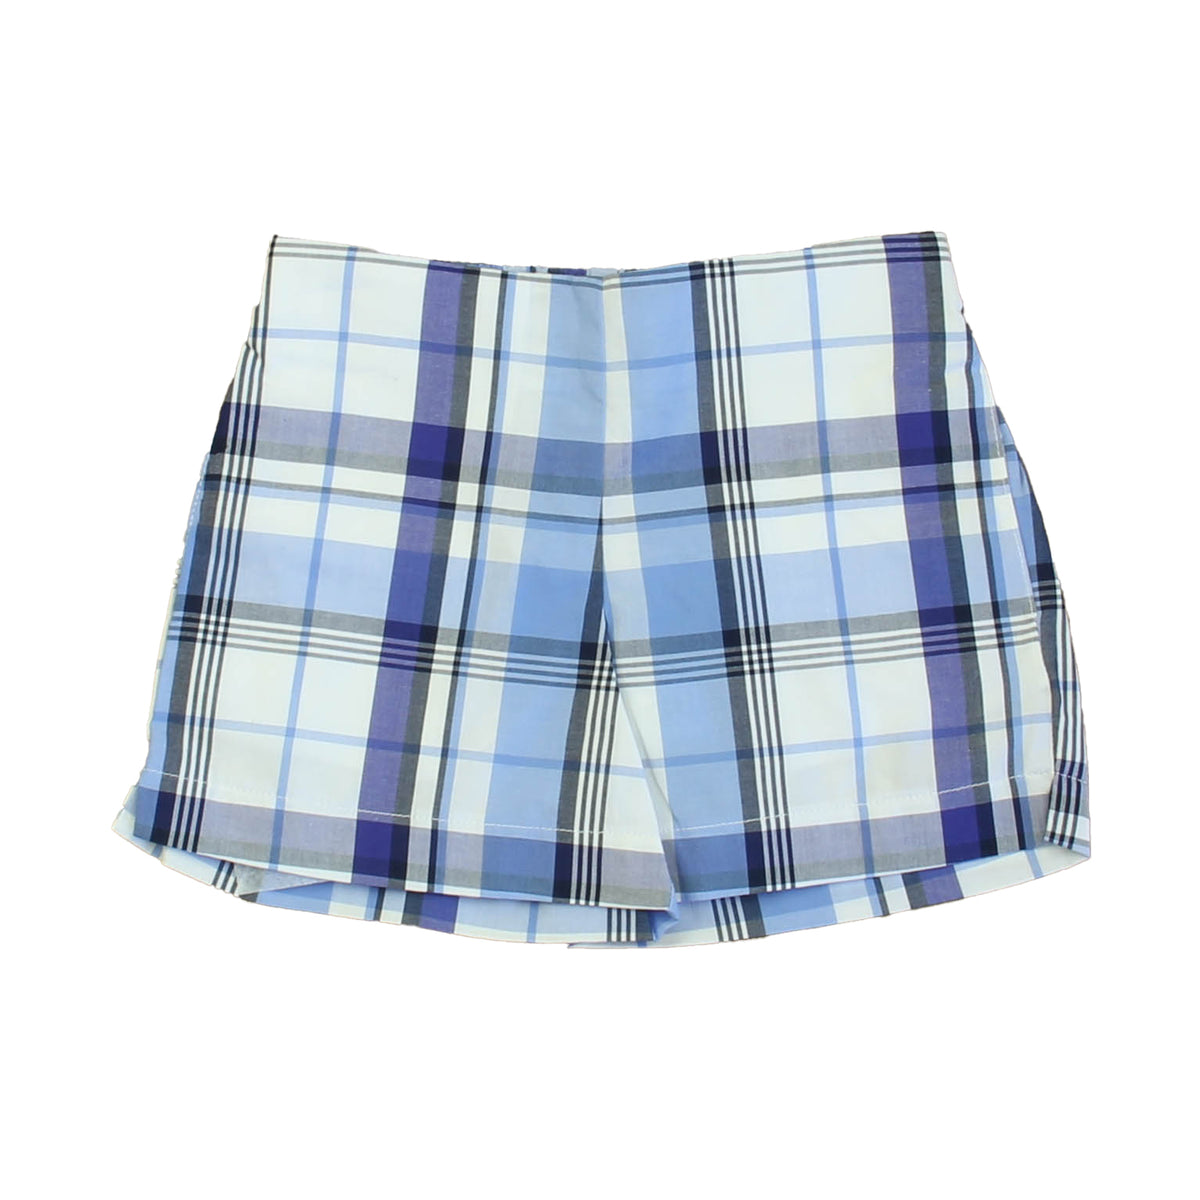 New with Tags: Blue Plaid Shorts size: 2-5T -- FINAL SALE